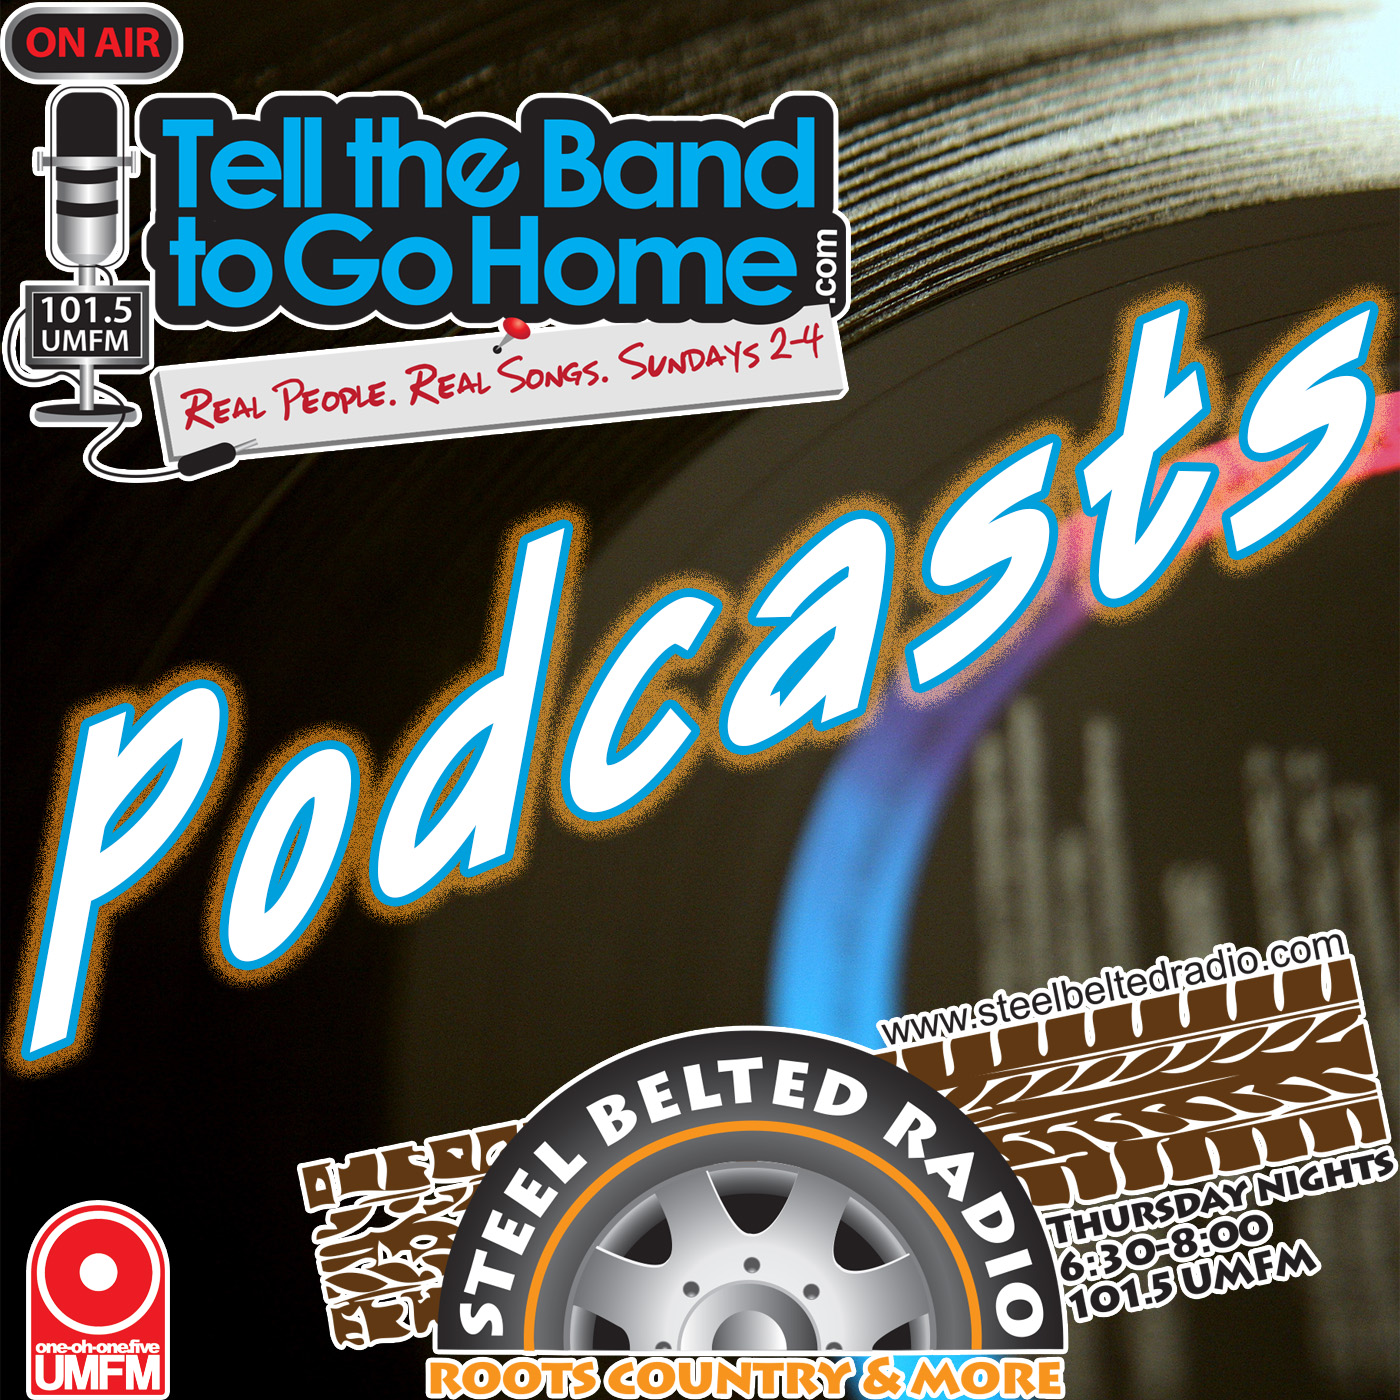 Tell the Band to Go Home/Steel Belted Radio Podcasts1400 x 1400